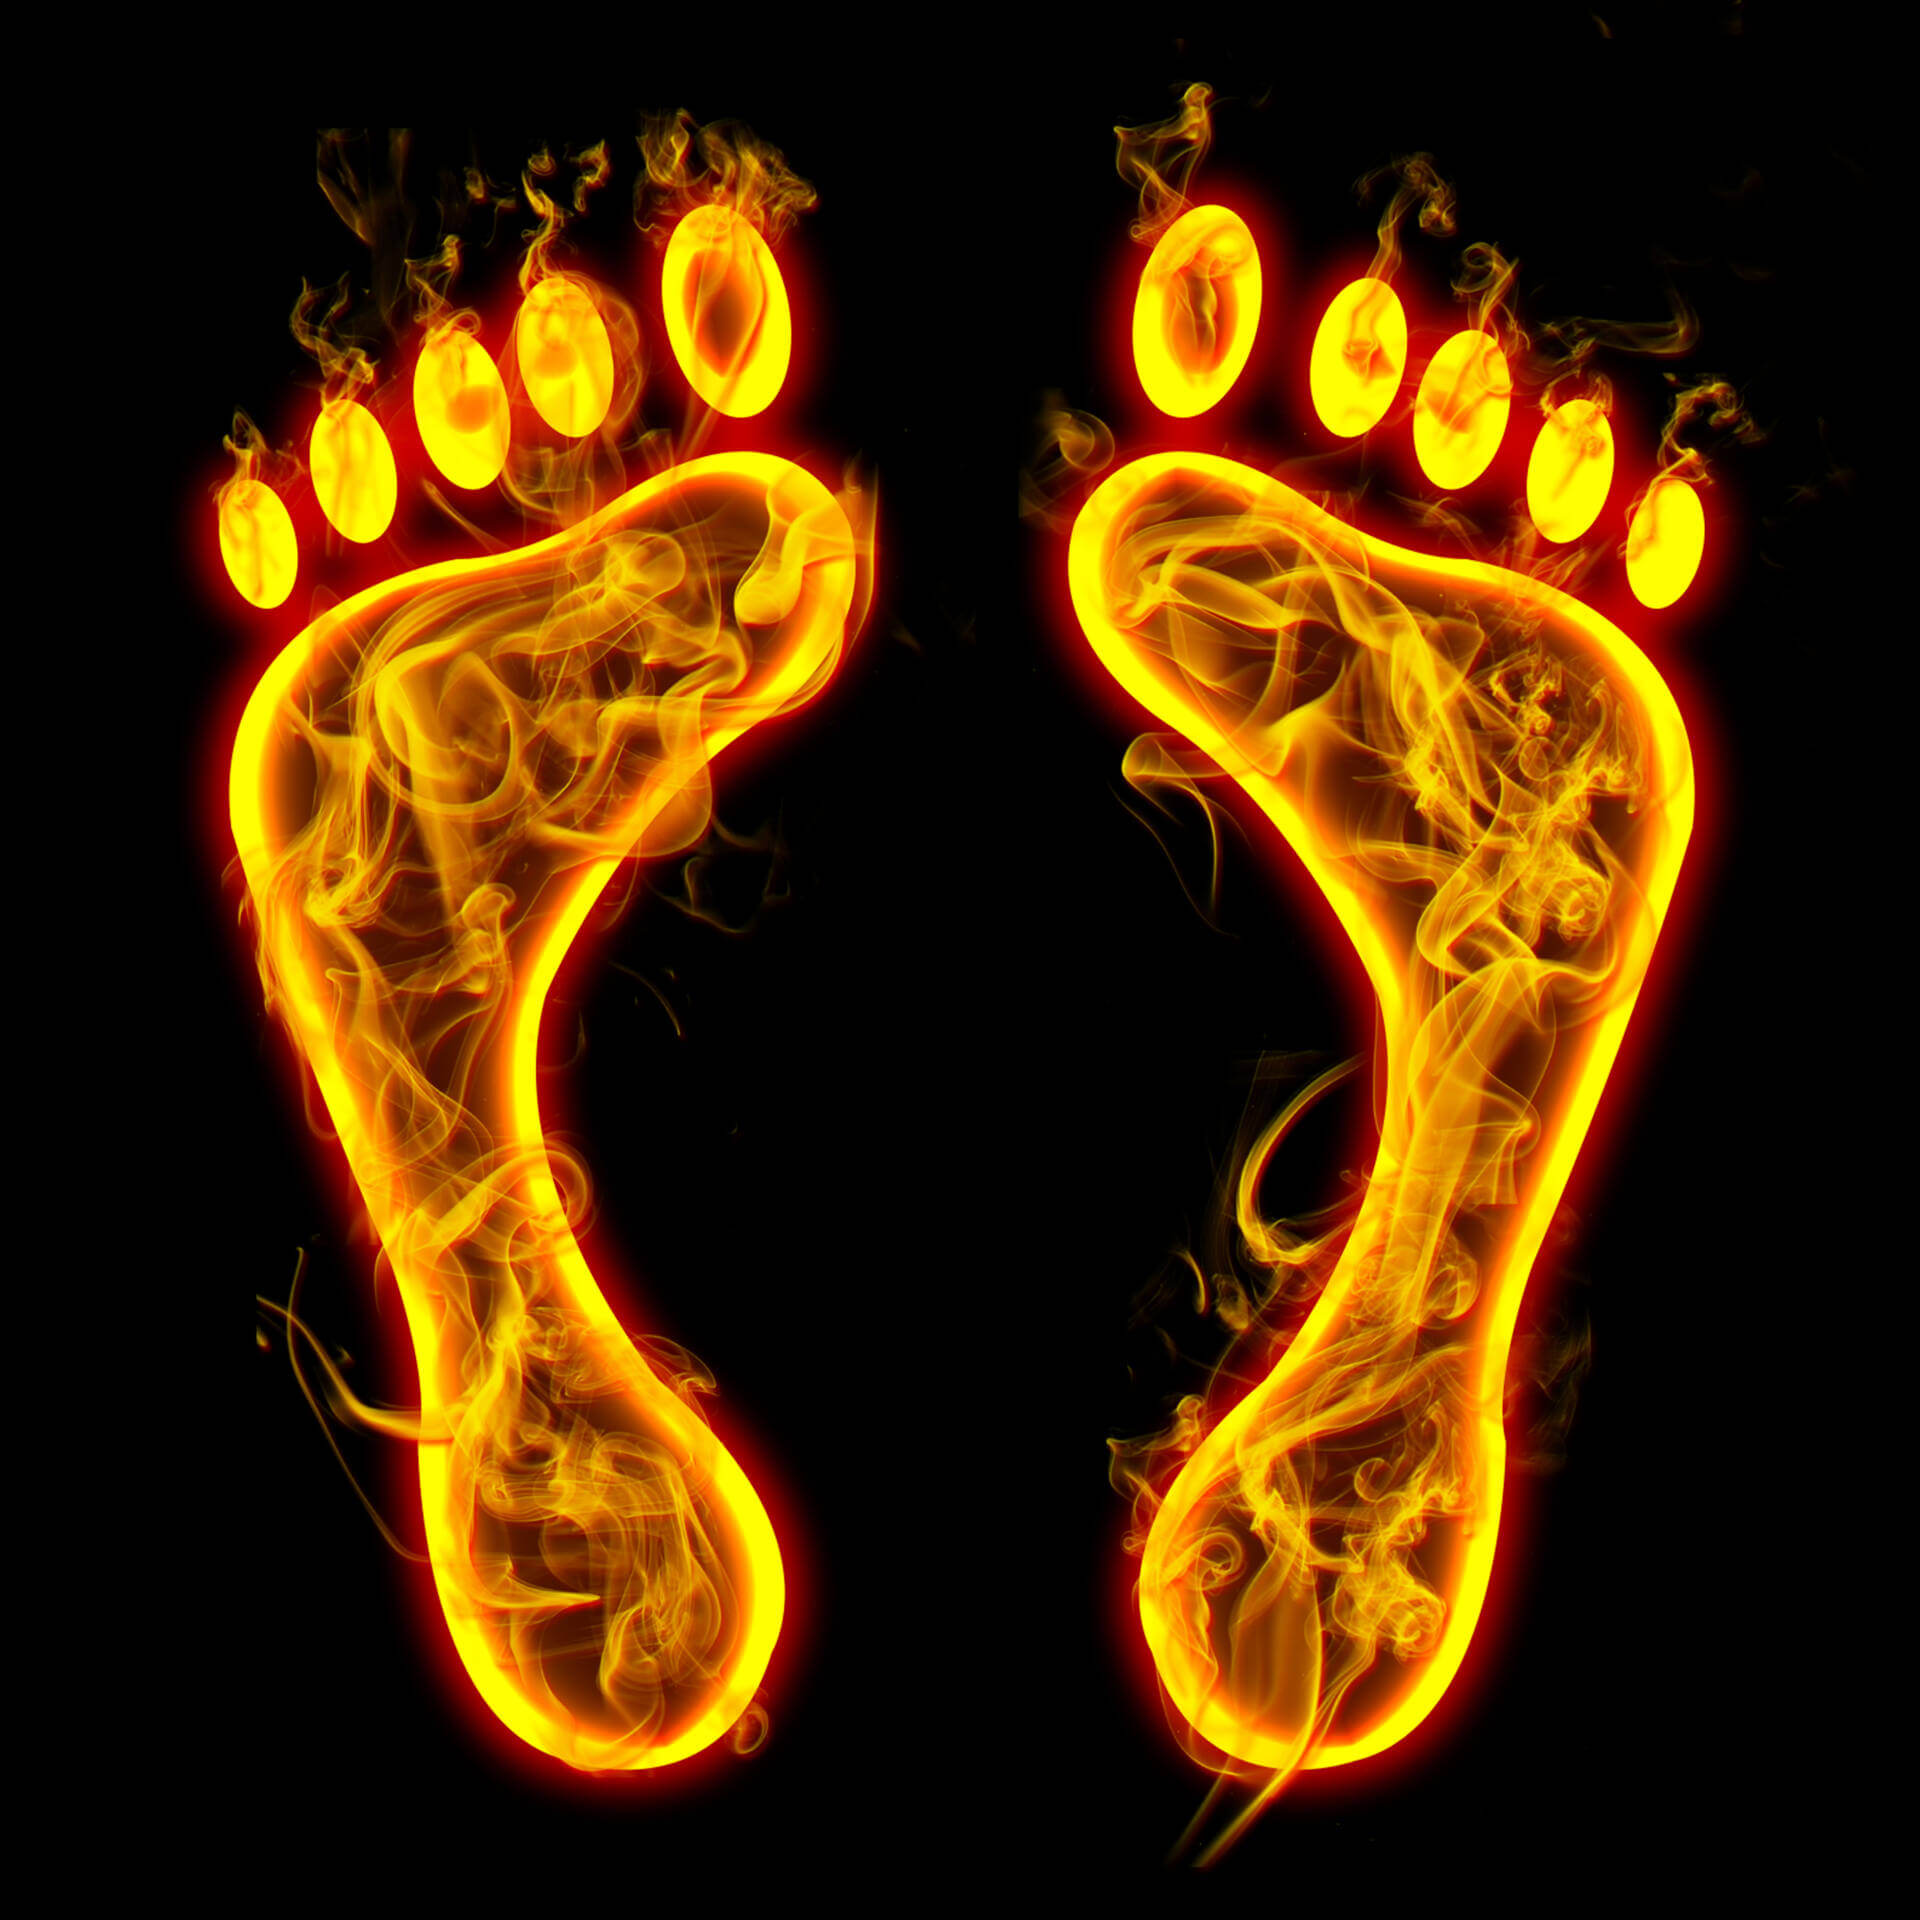 Burning Foot can be treated at Centennial Spine and Pain